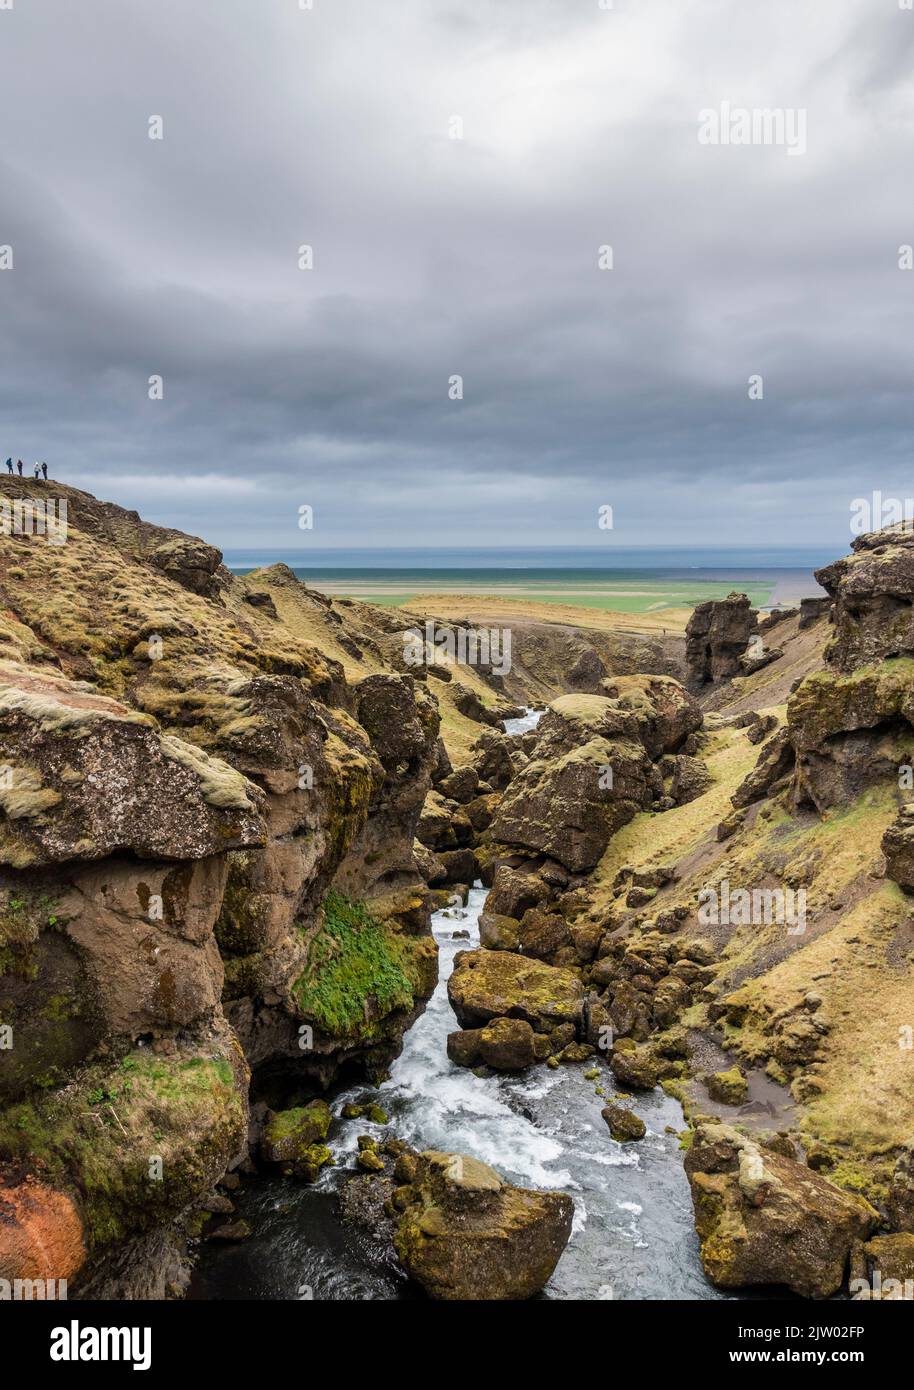 Waterfalls on the River Skóga, southern region of Iceland. Stock Photo